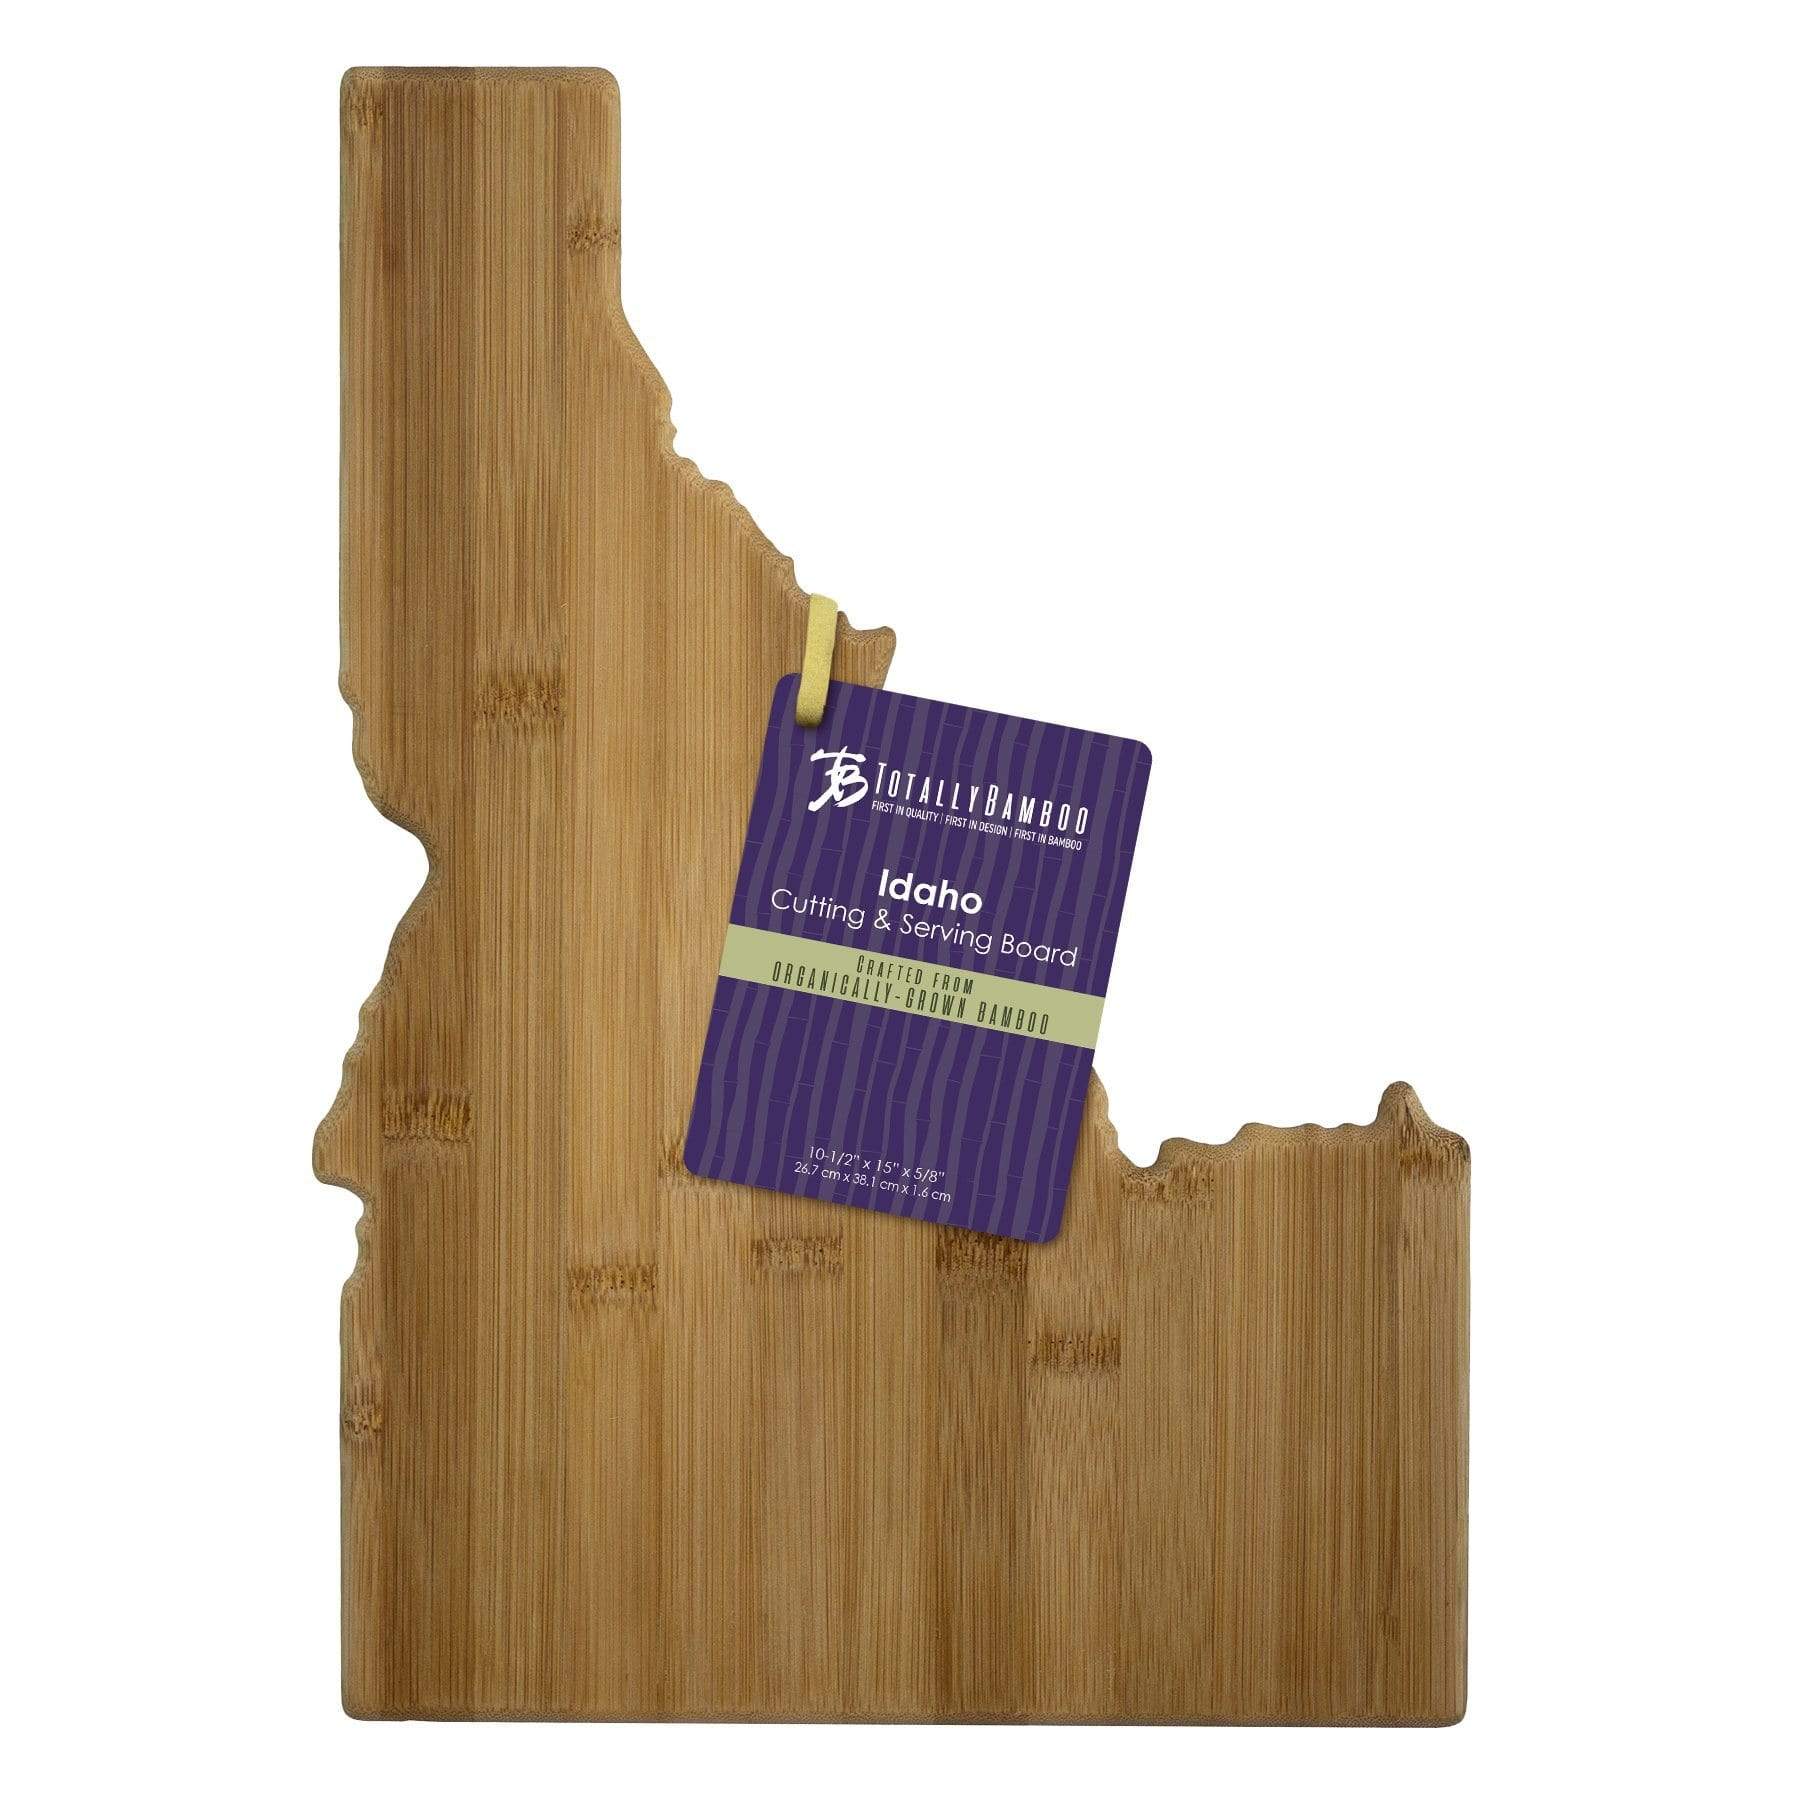 Totally Bamboo Idaho State Shaped Bamboo Serving and Cutting Board